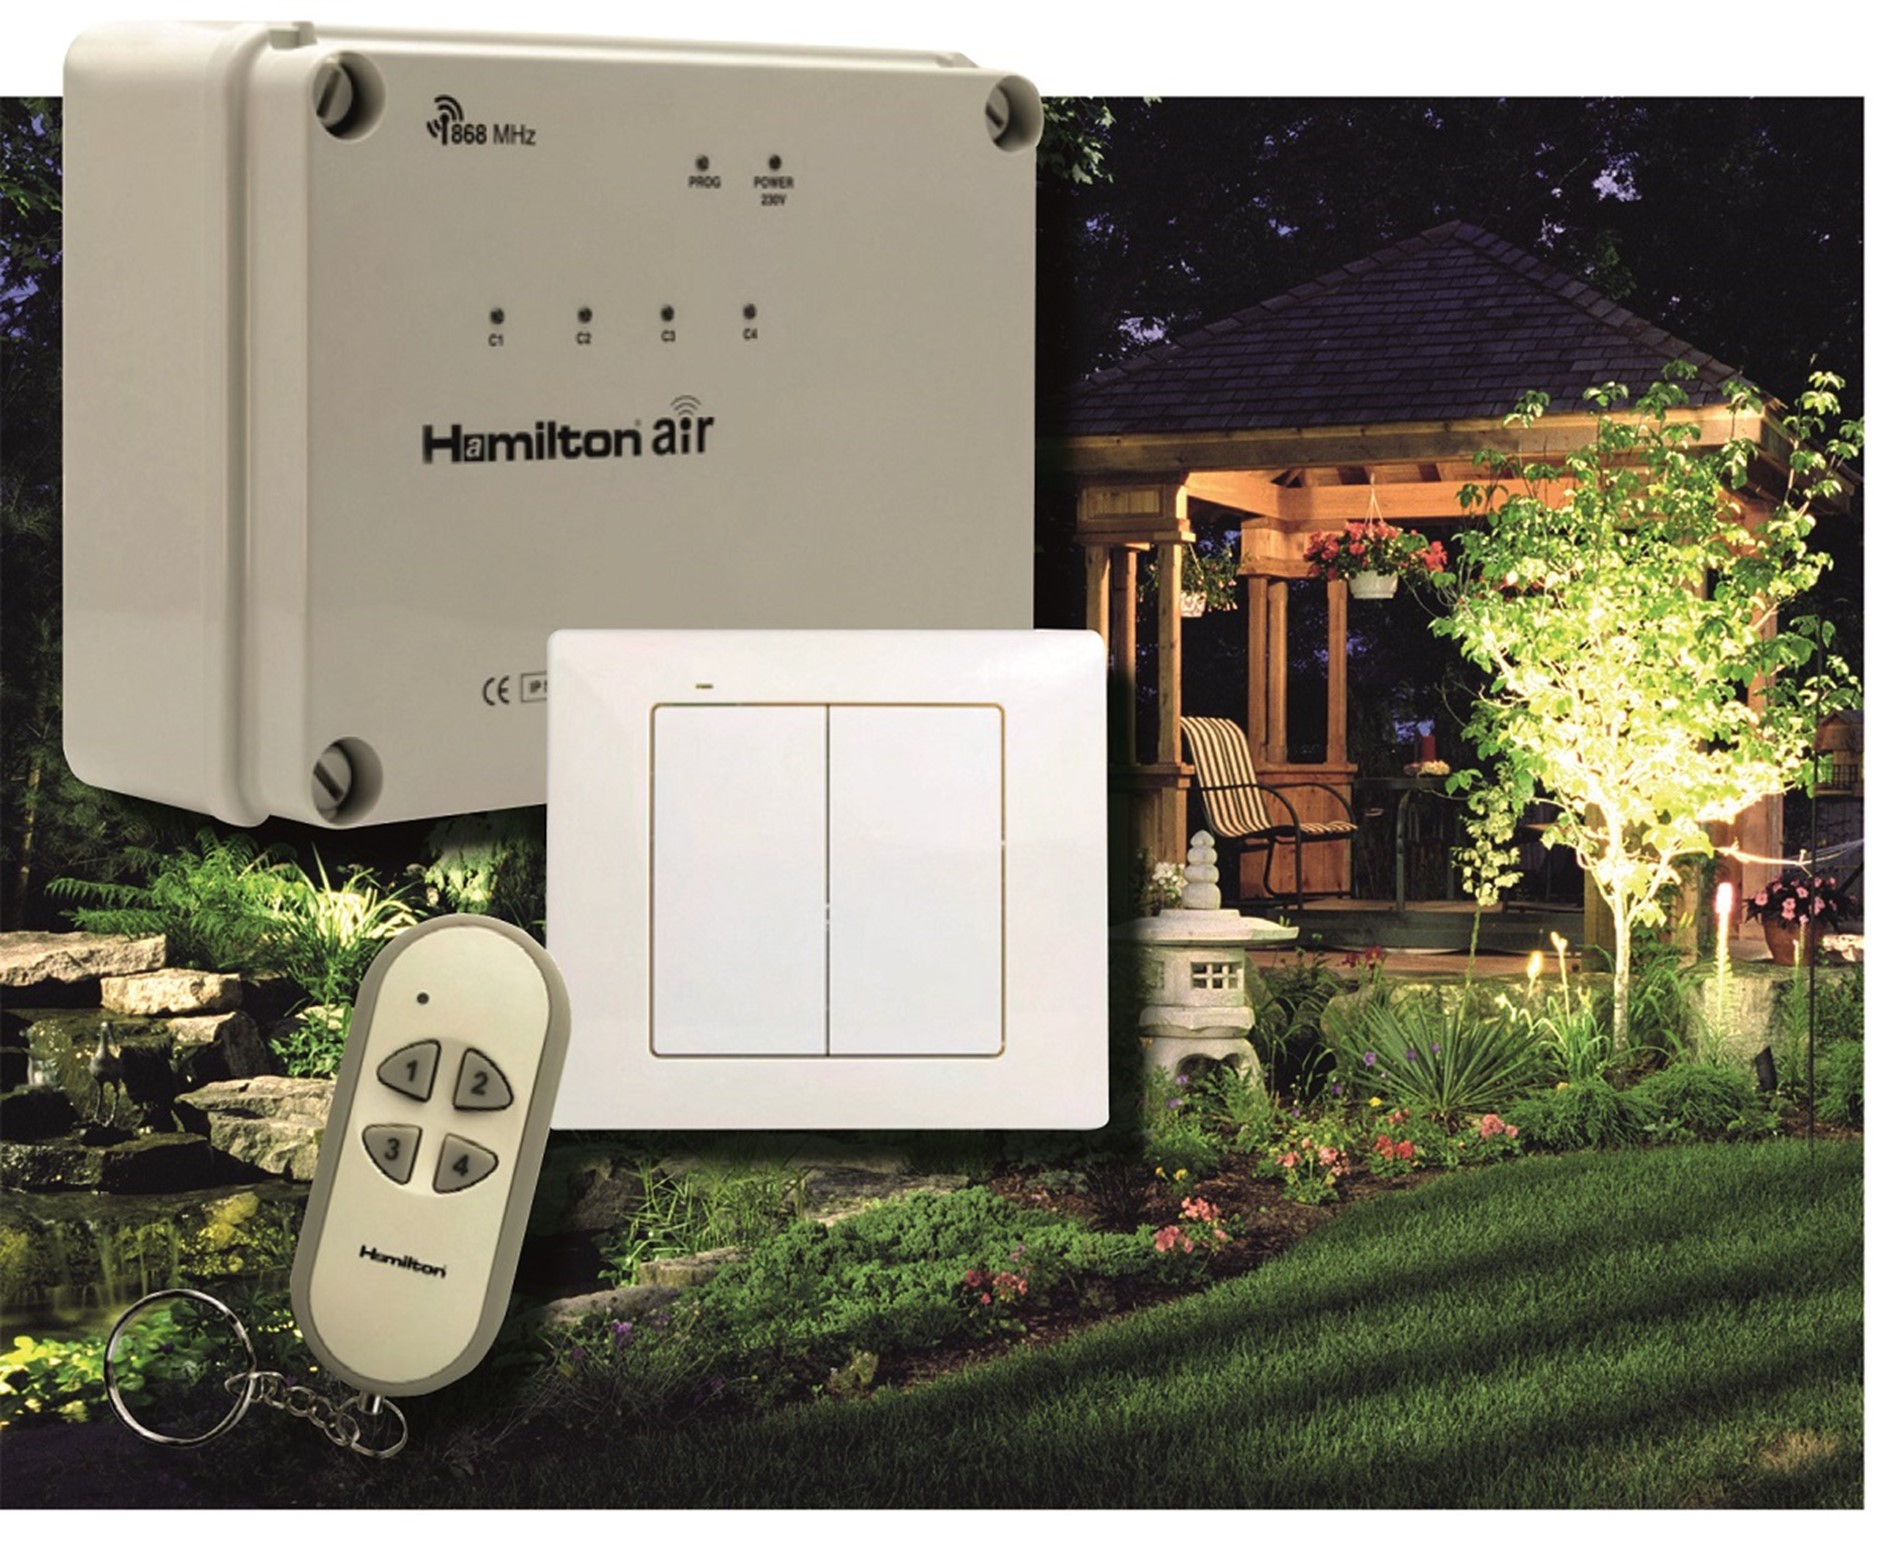 Give the garden some 'AIR' time - Hamilton Air Product Review